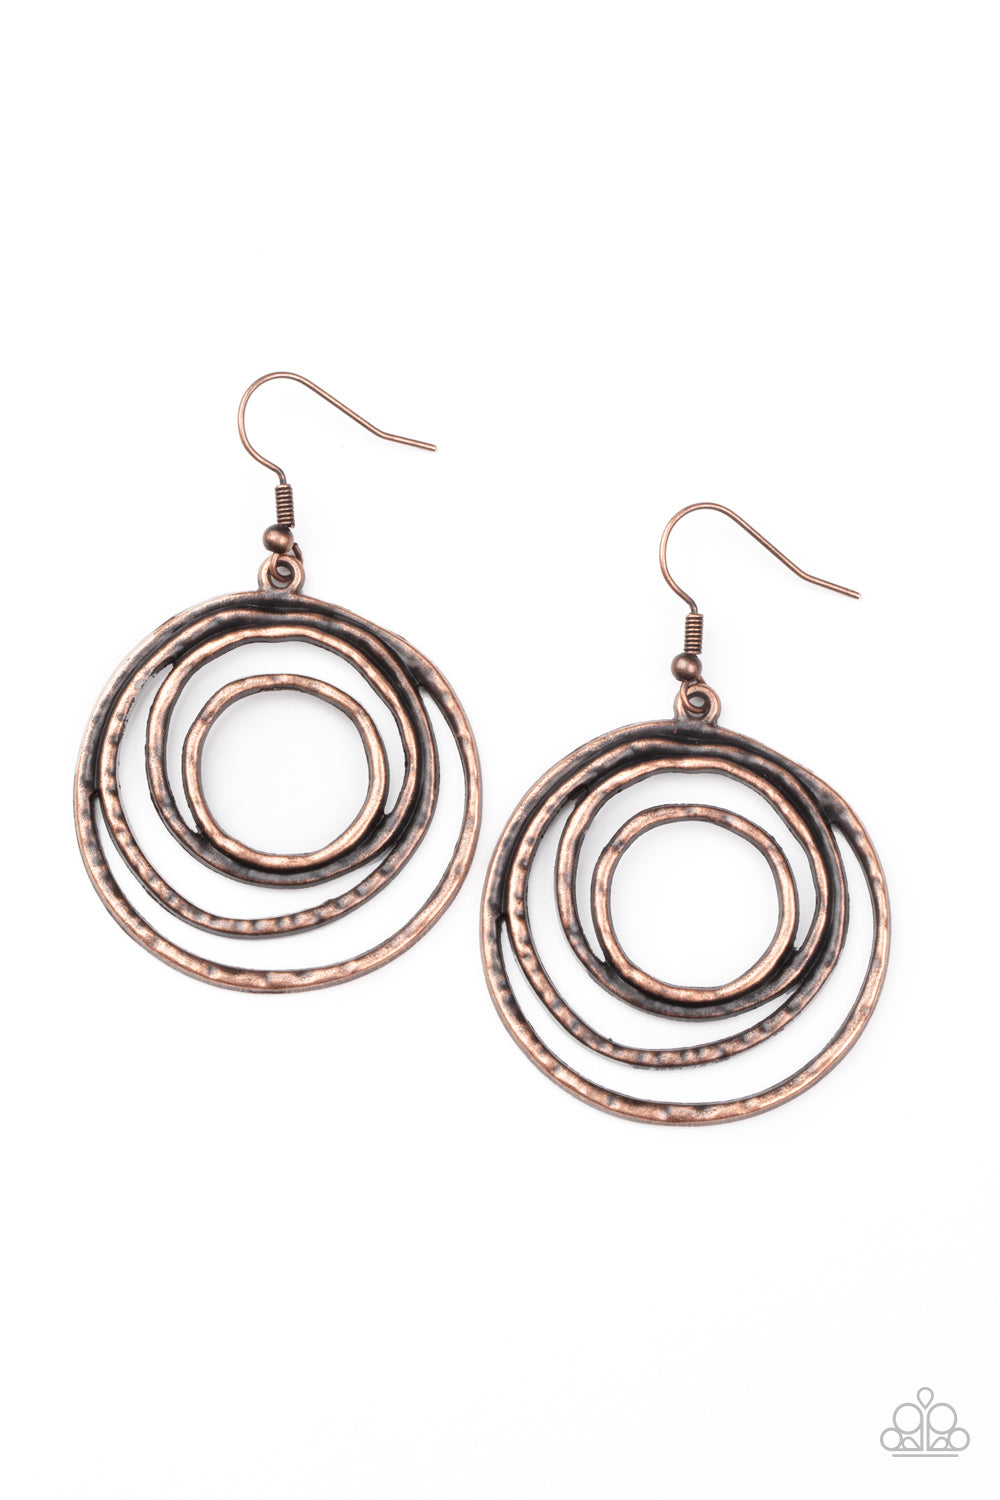 Spiraling Out of Control - Copper Earrings - Paparazzi Accessories